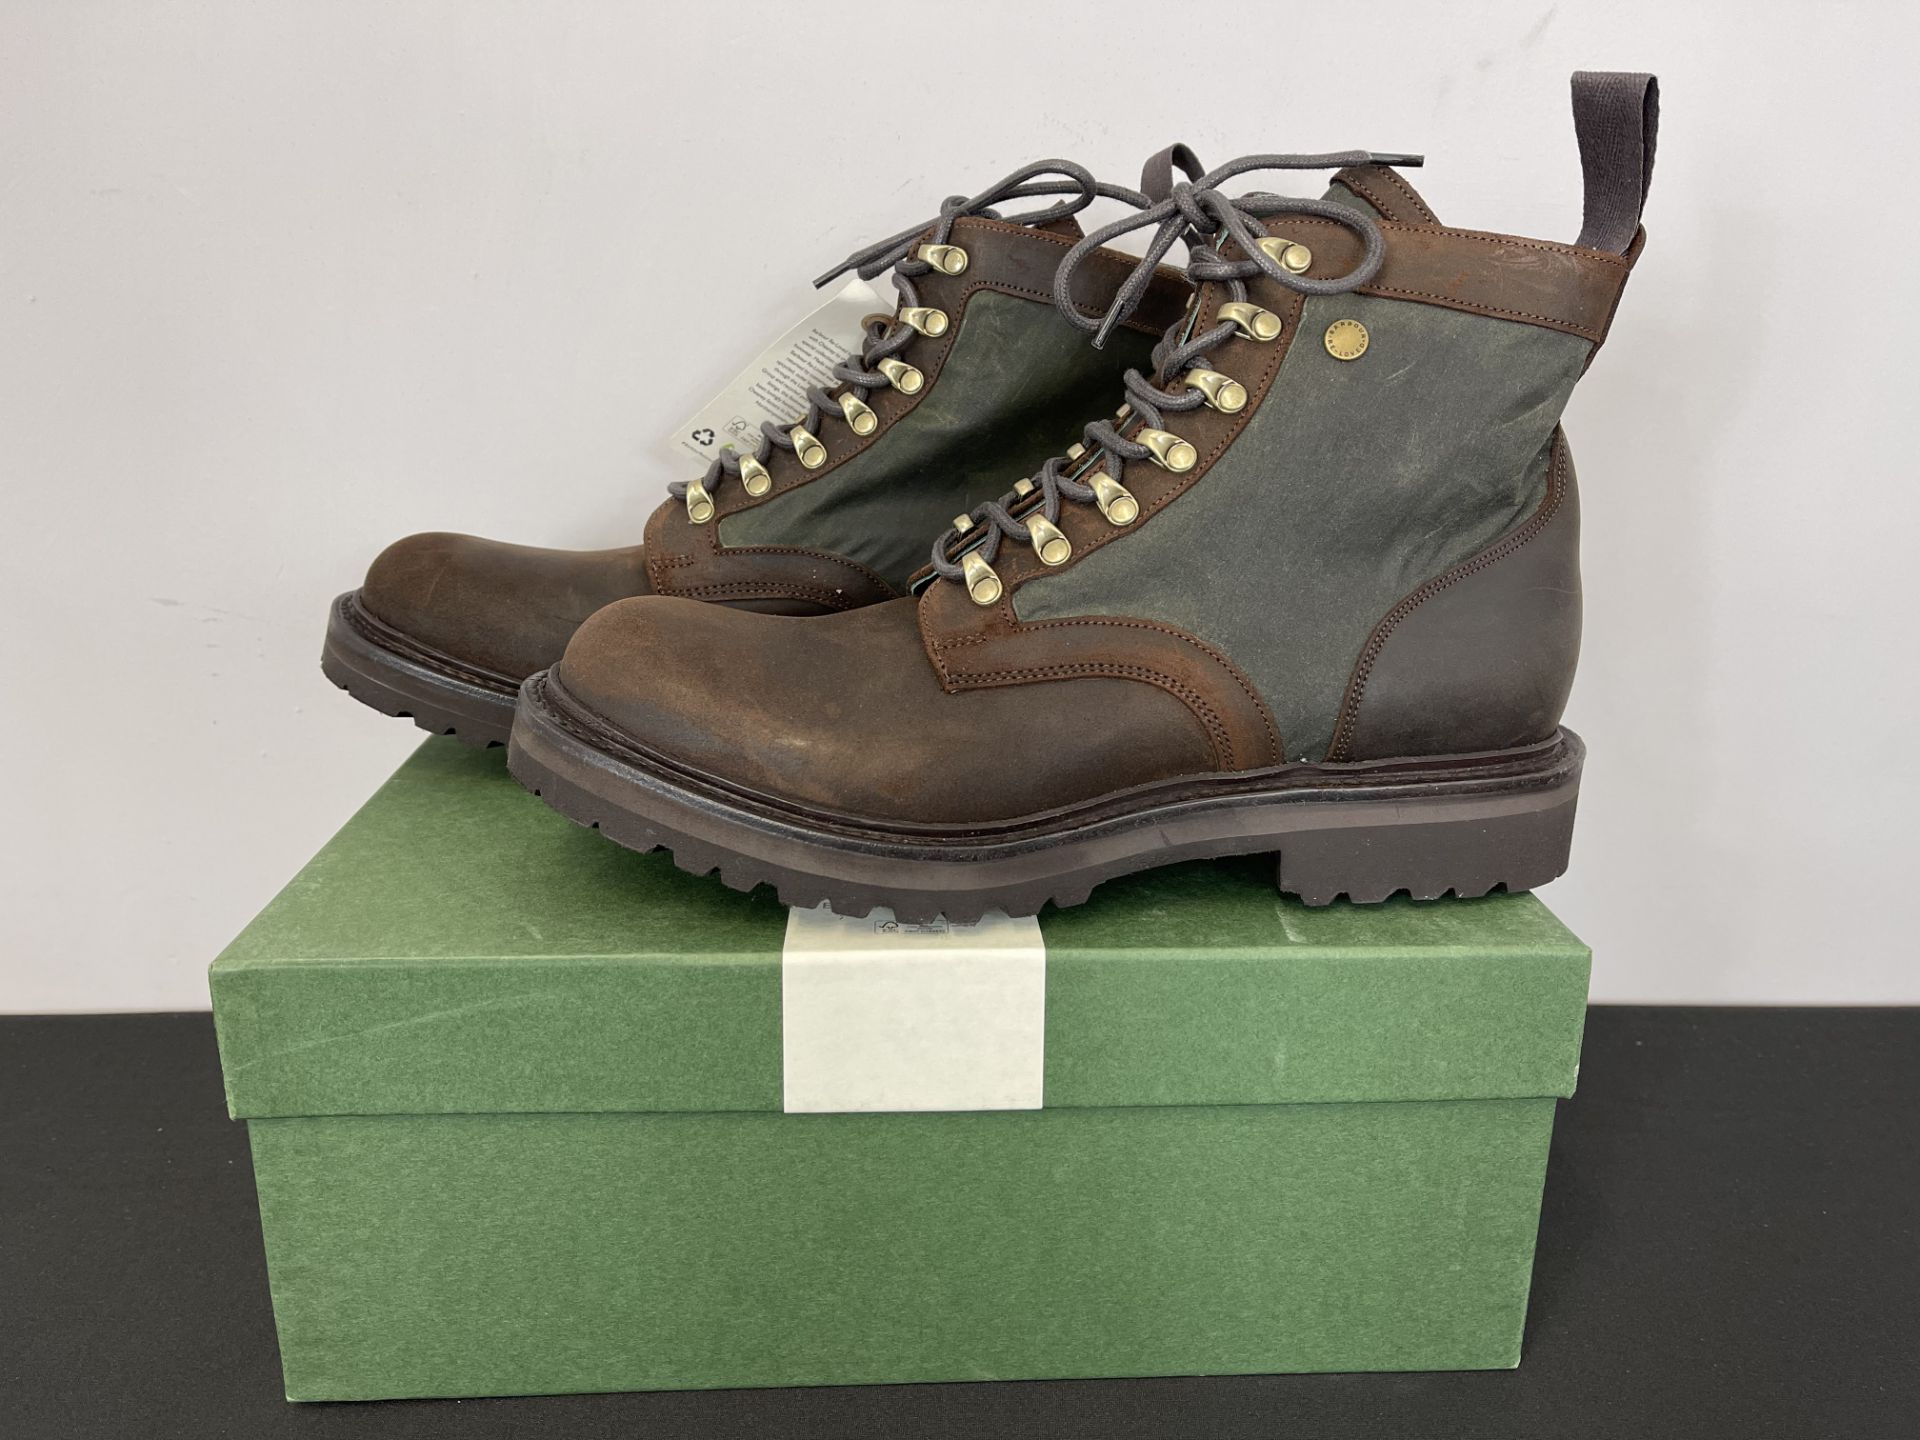 New Size 7 Barbour Joseph Cheaney Reloved Brown Polebrook Derby Boots - RRP - £189.